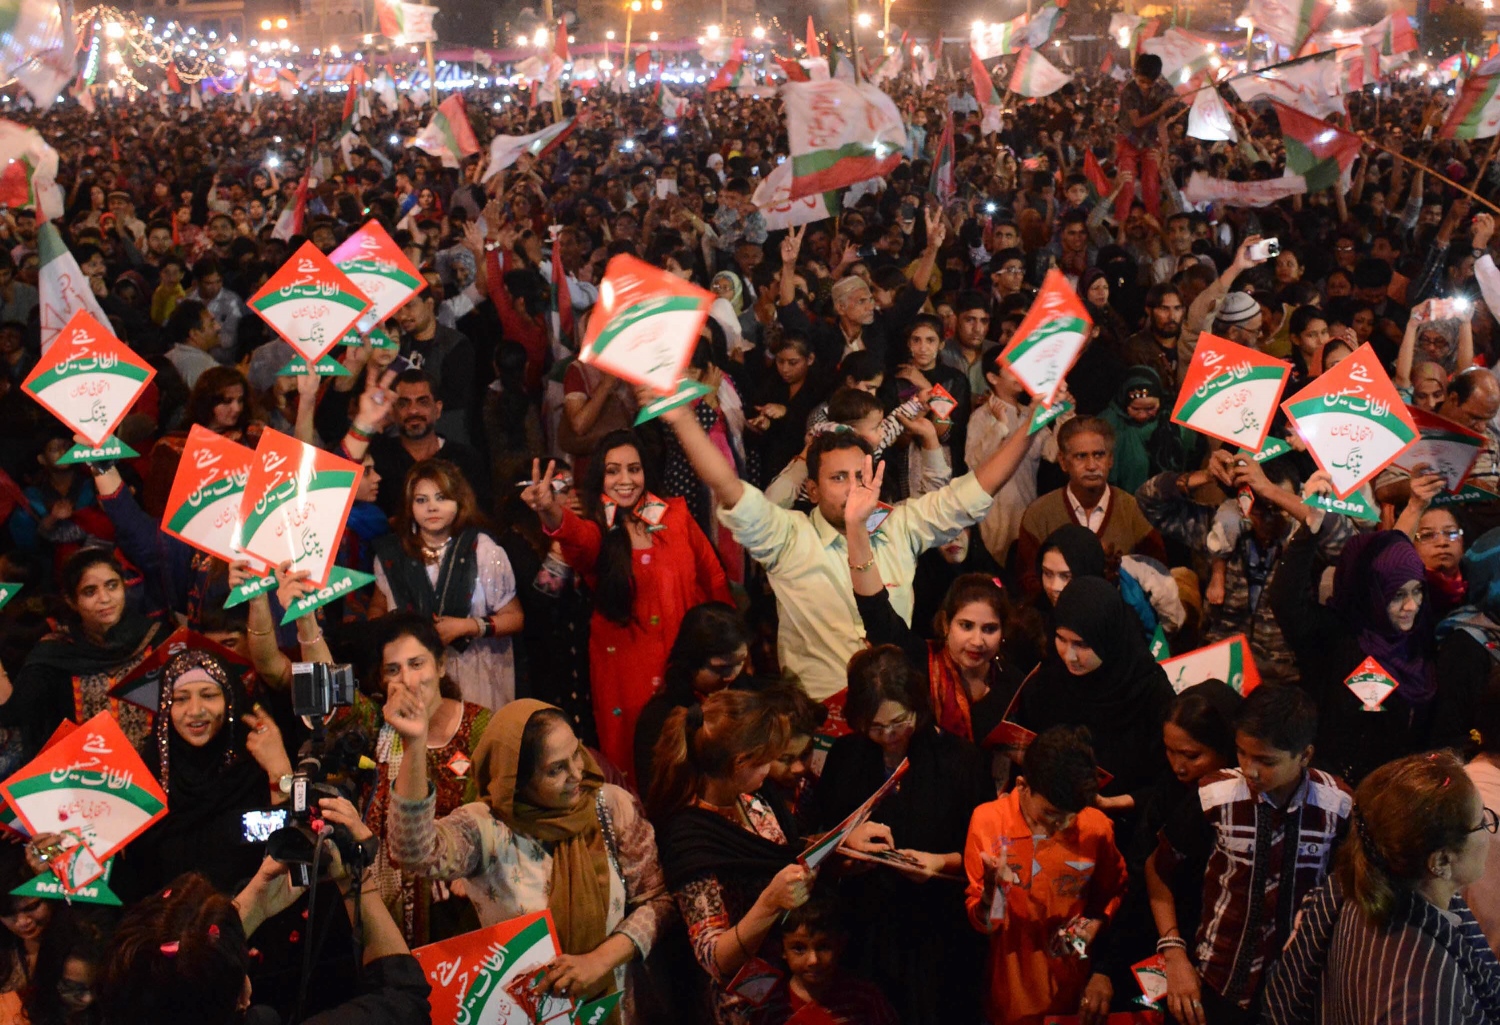 mqm workers and supporters celebrate victory in karachi lg polls at jinnah ground azizabad on december 6 2015 photo mohammad noman express